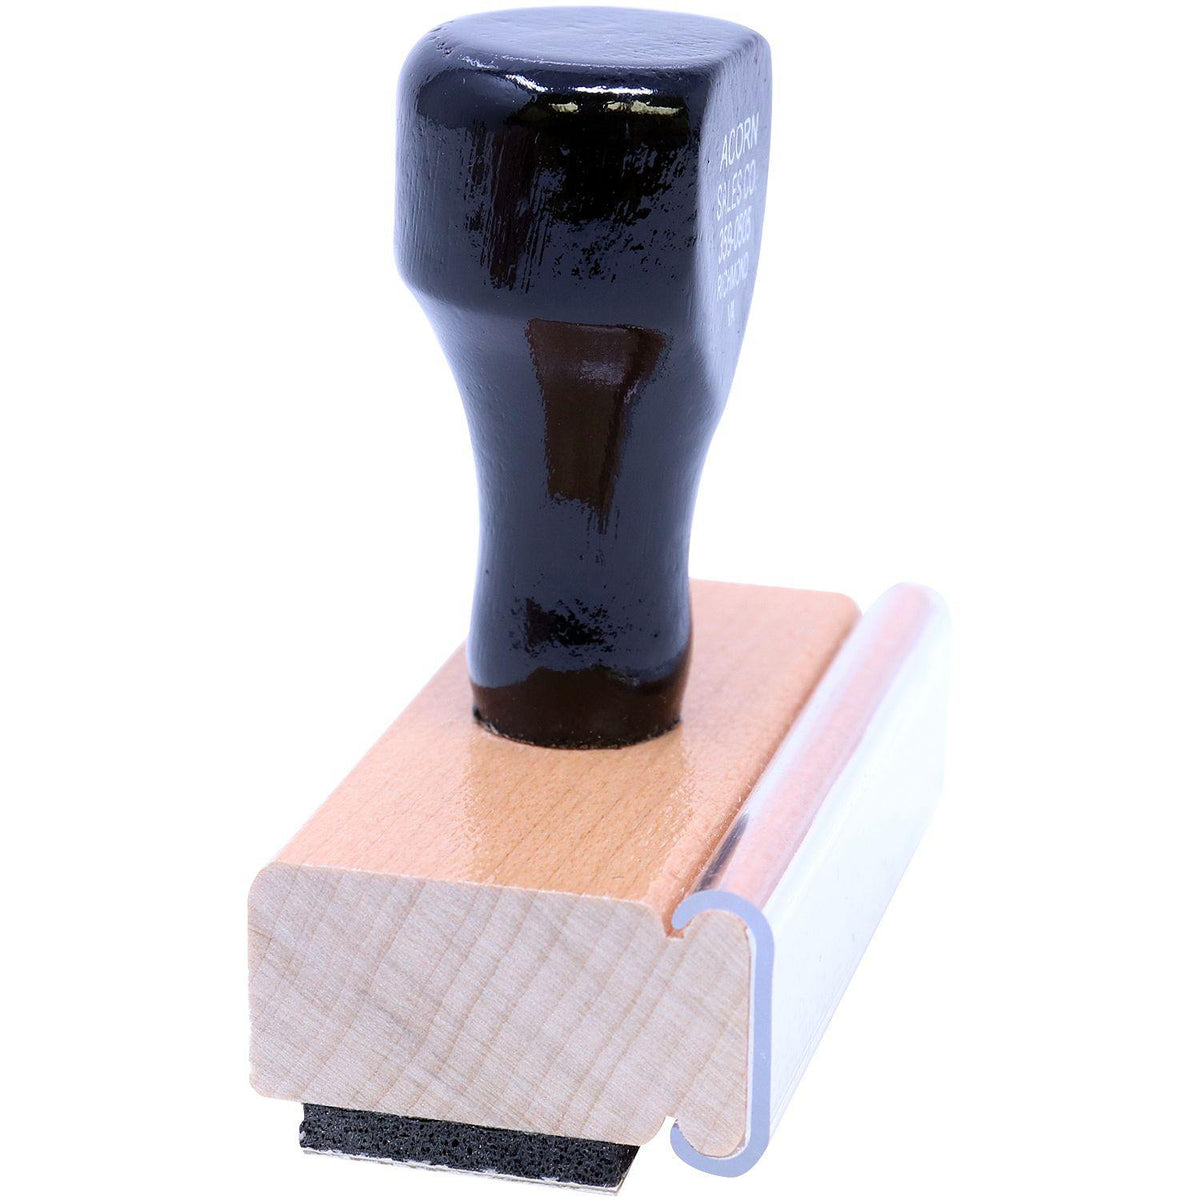 Side View of Large Distributed With Line Rubber Stamp at an Angle